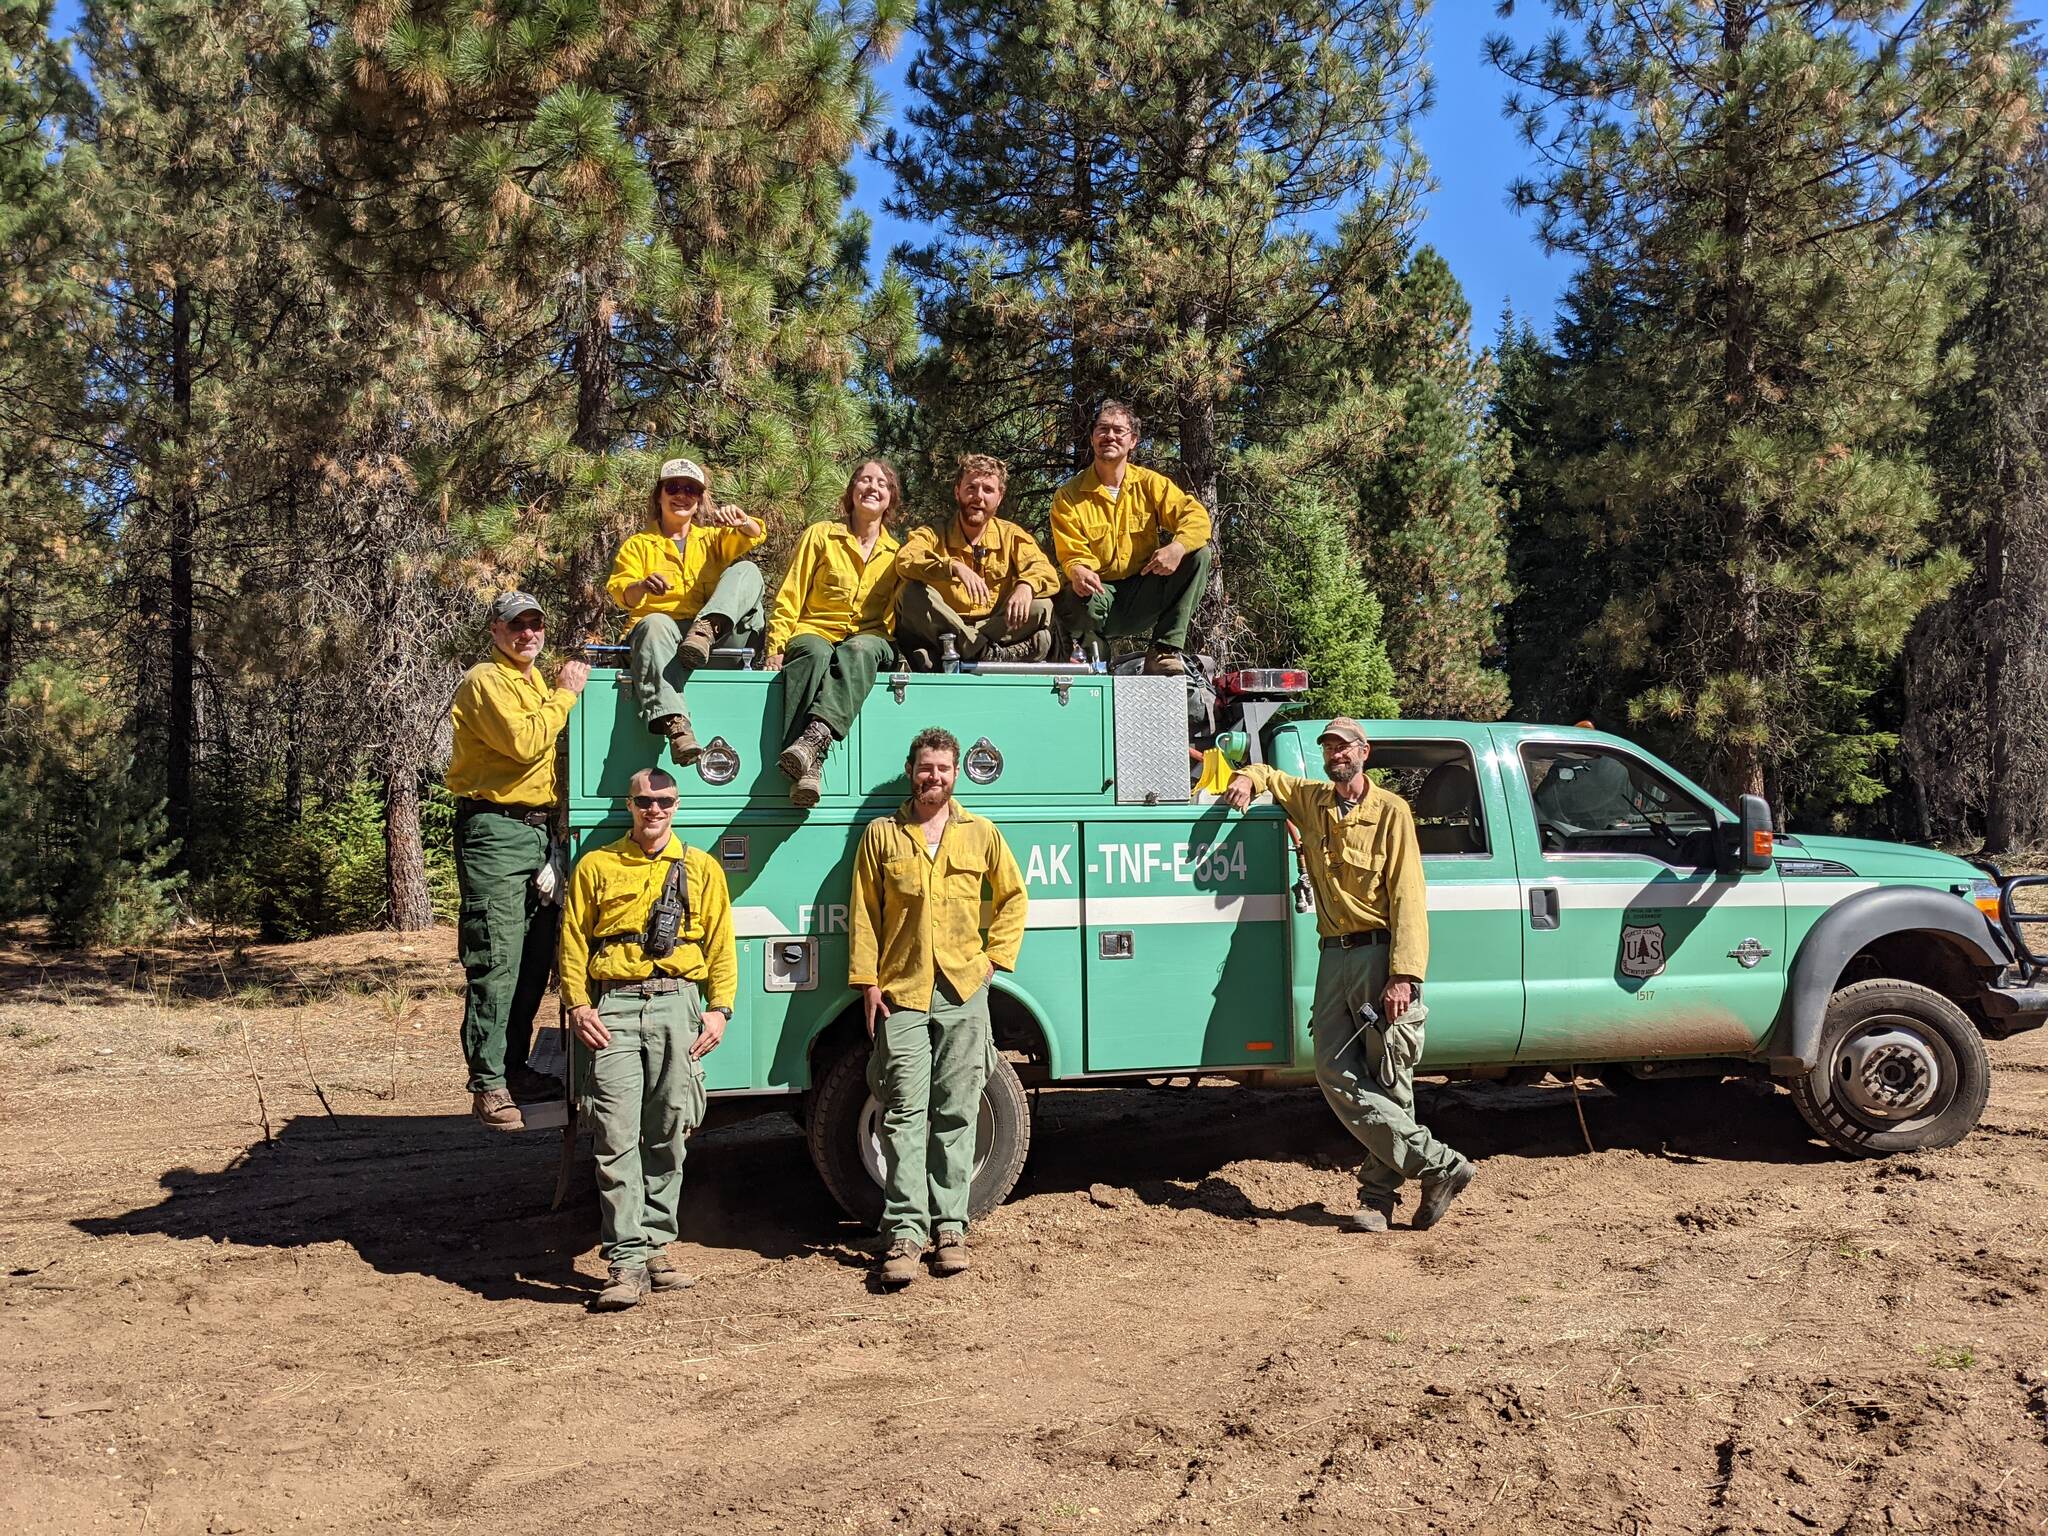 Courtesy photo / U.S. Forest Service 
A Forest Service fire crew takes a break during an operation. Fire crews from Alaska are frequently deployed to the Lower 48 to help combat wildfires that are growing larger and closer to urban areas in many cases.